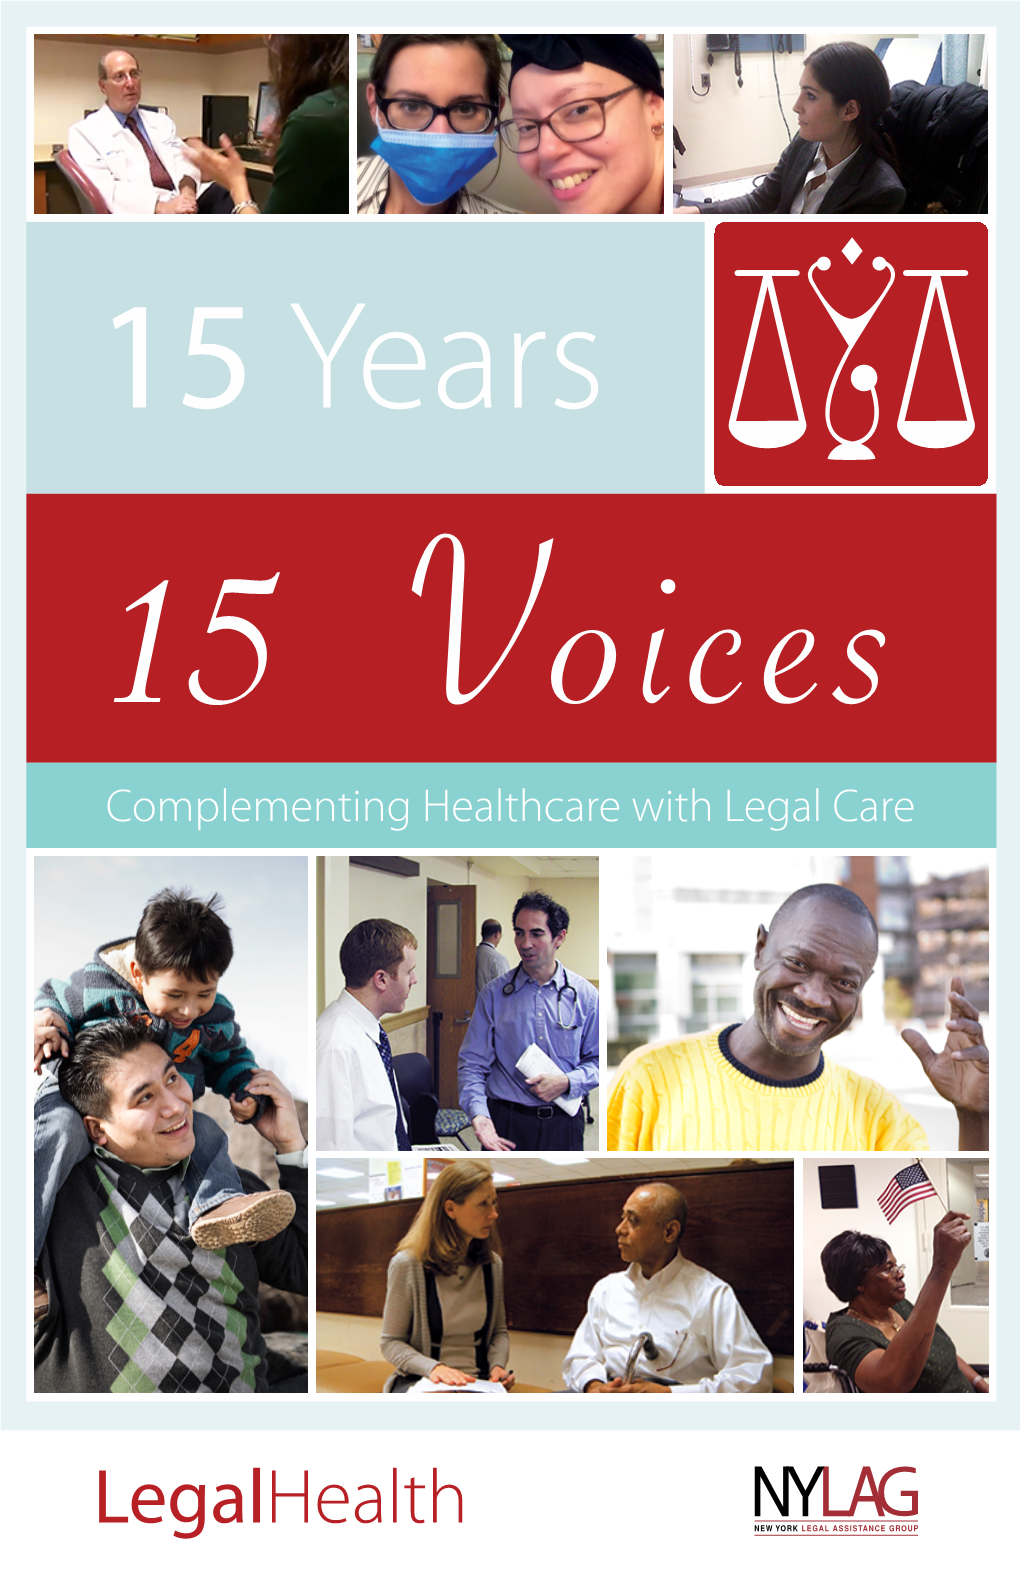 15 Years 15 Voices Complementing Healthcare with Legal Care